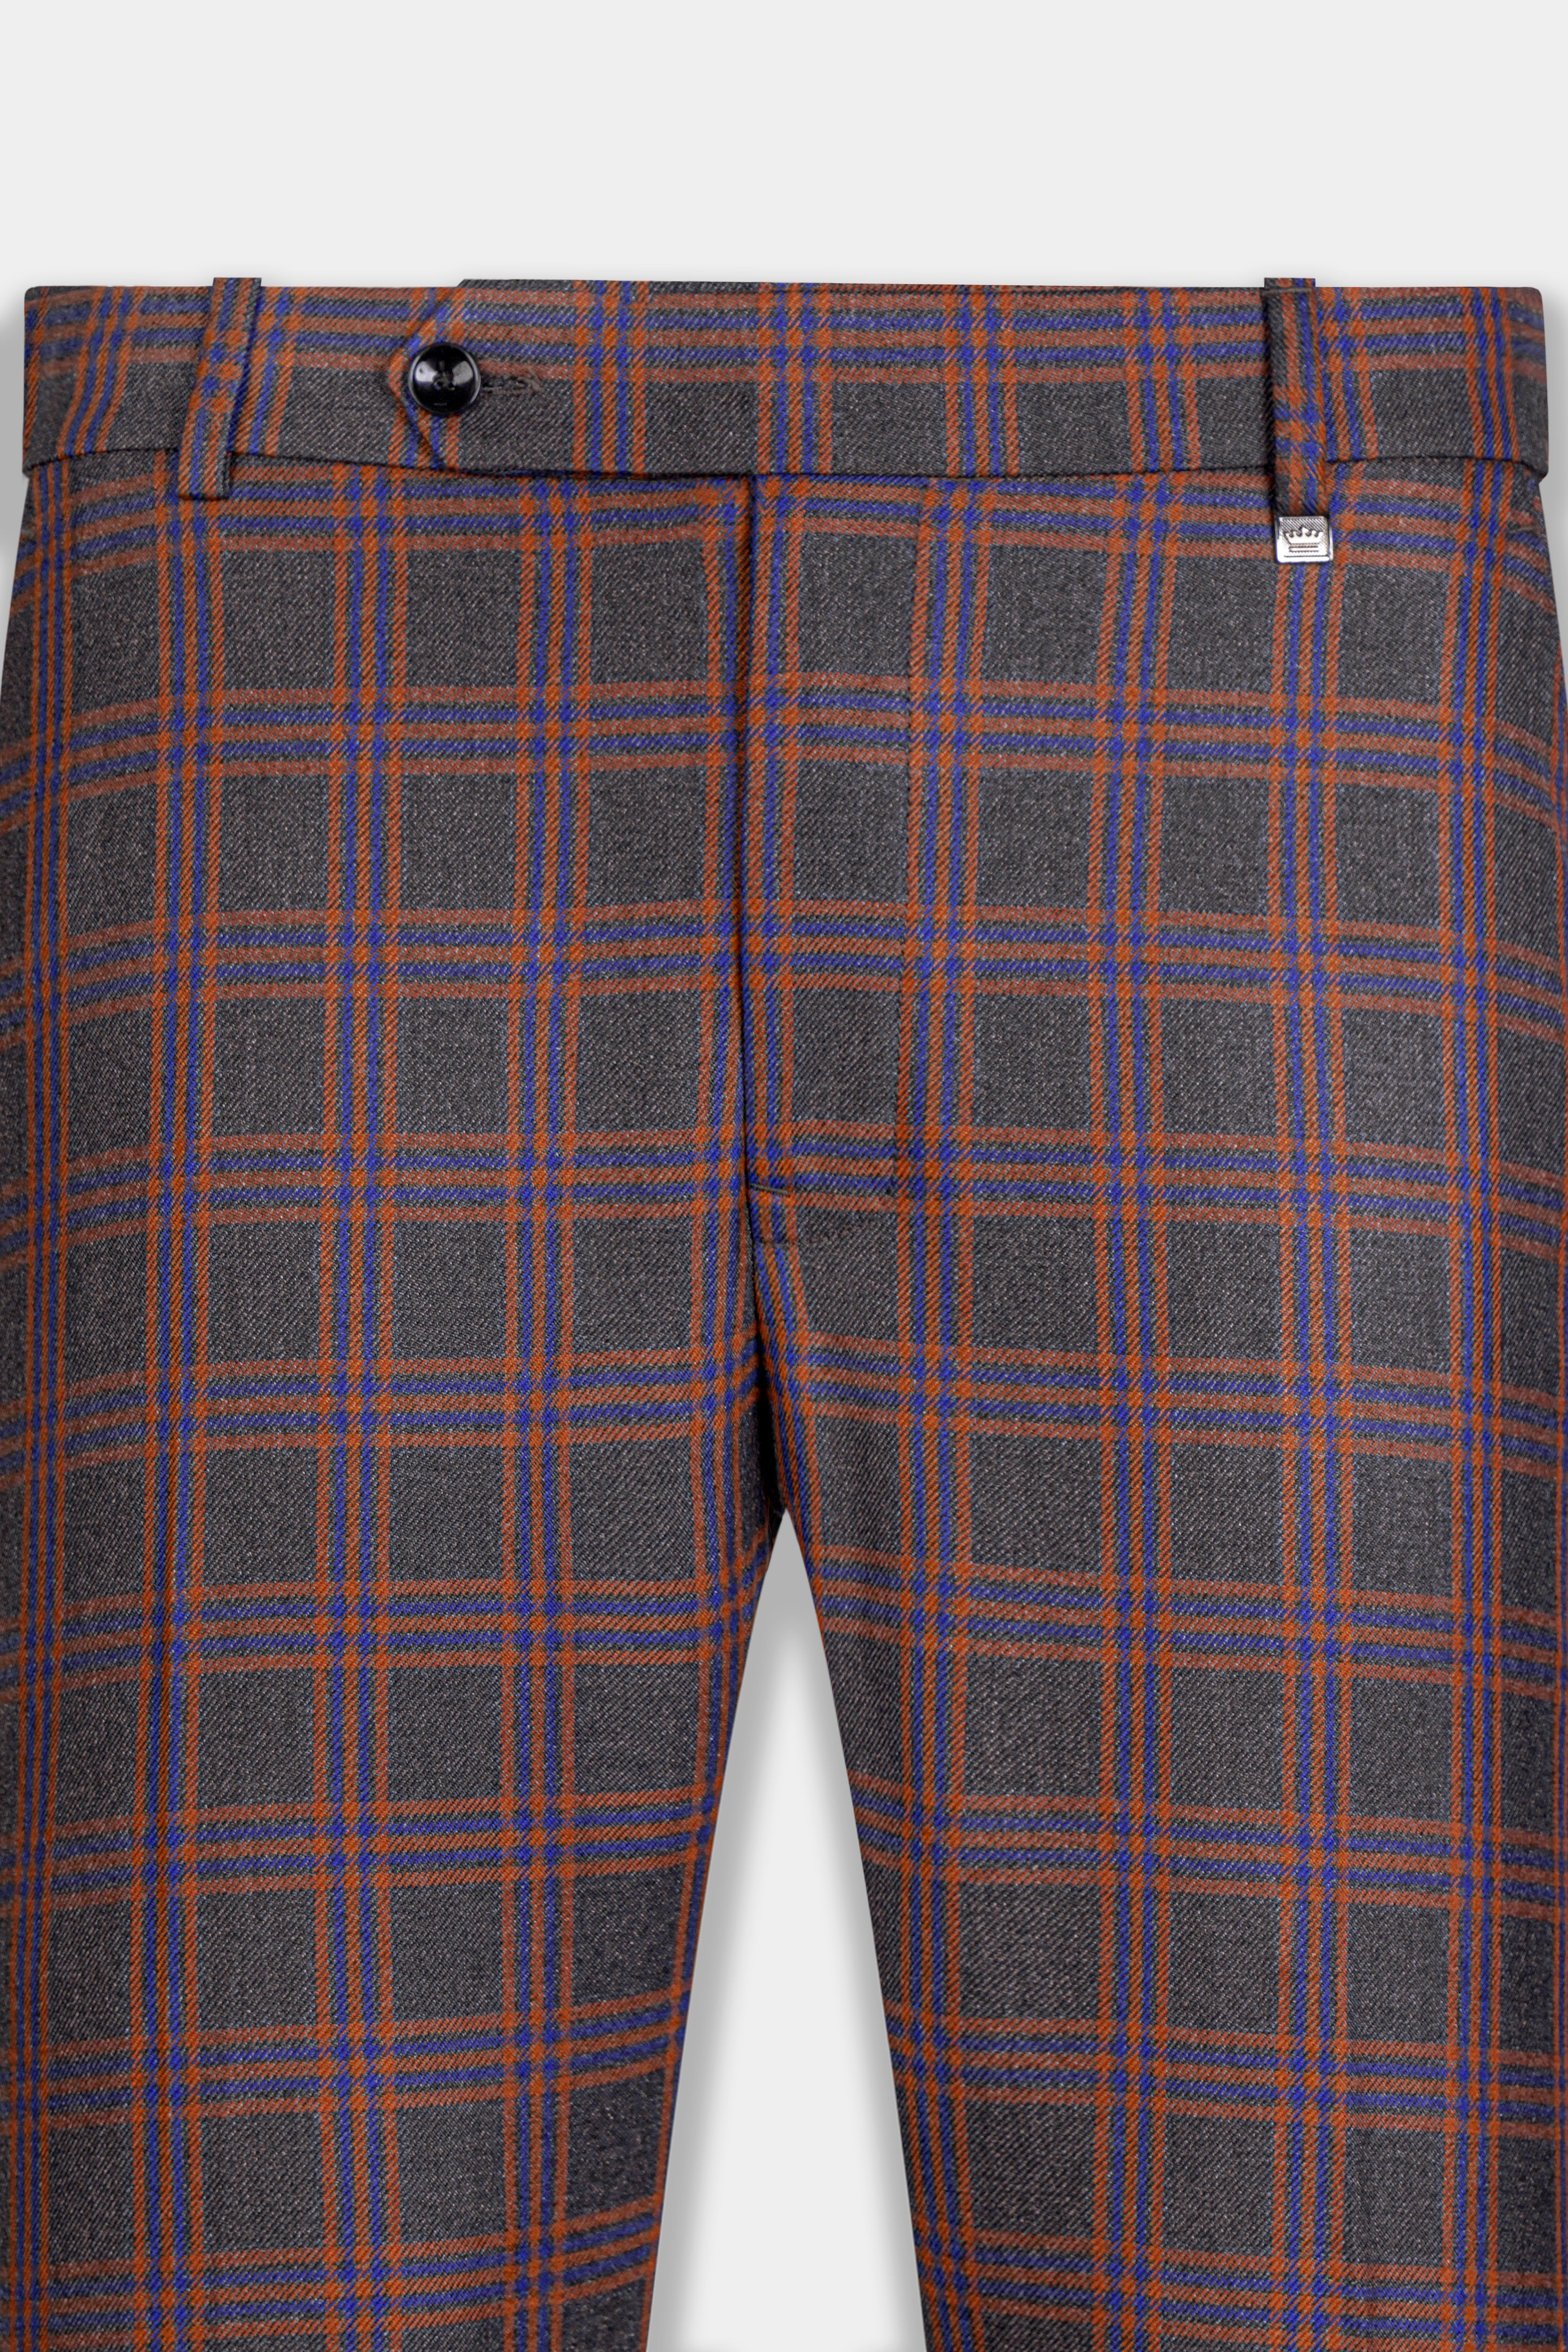 Emperor Gray and Russet Brown Plaid Tweed Pant